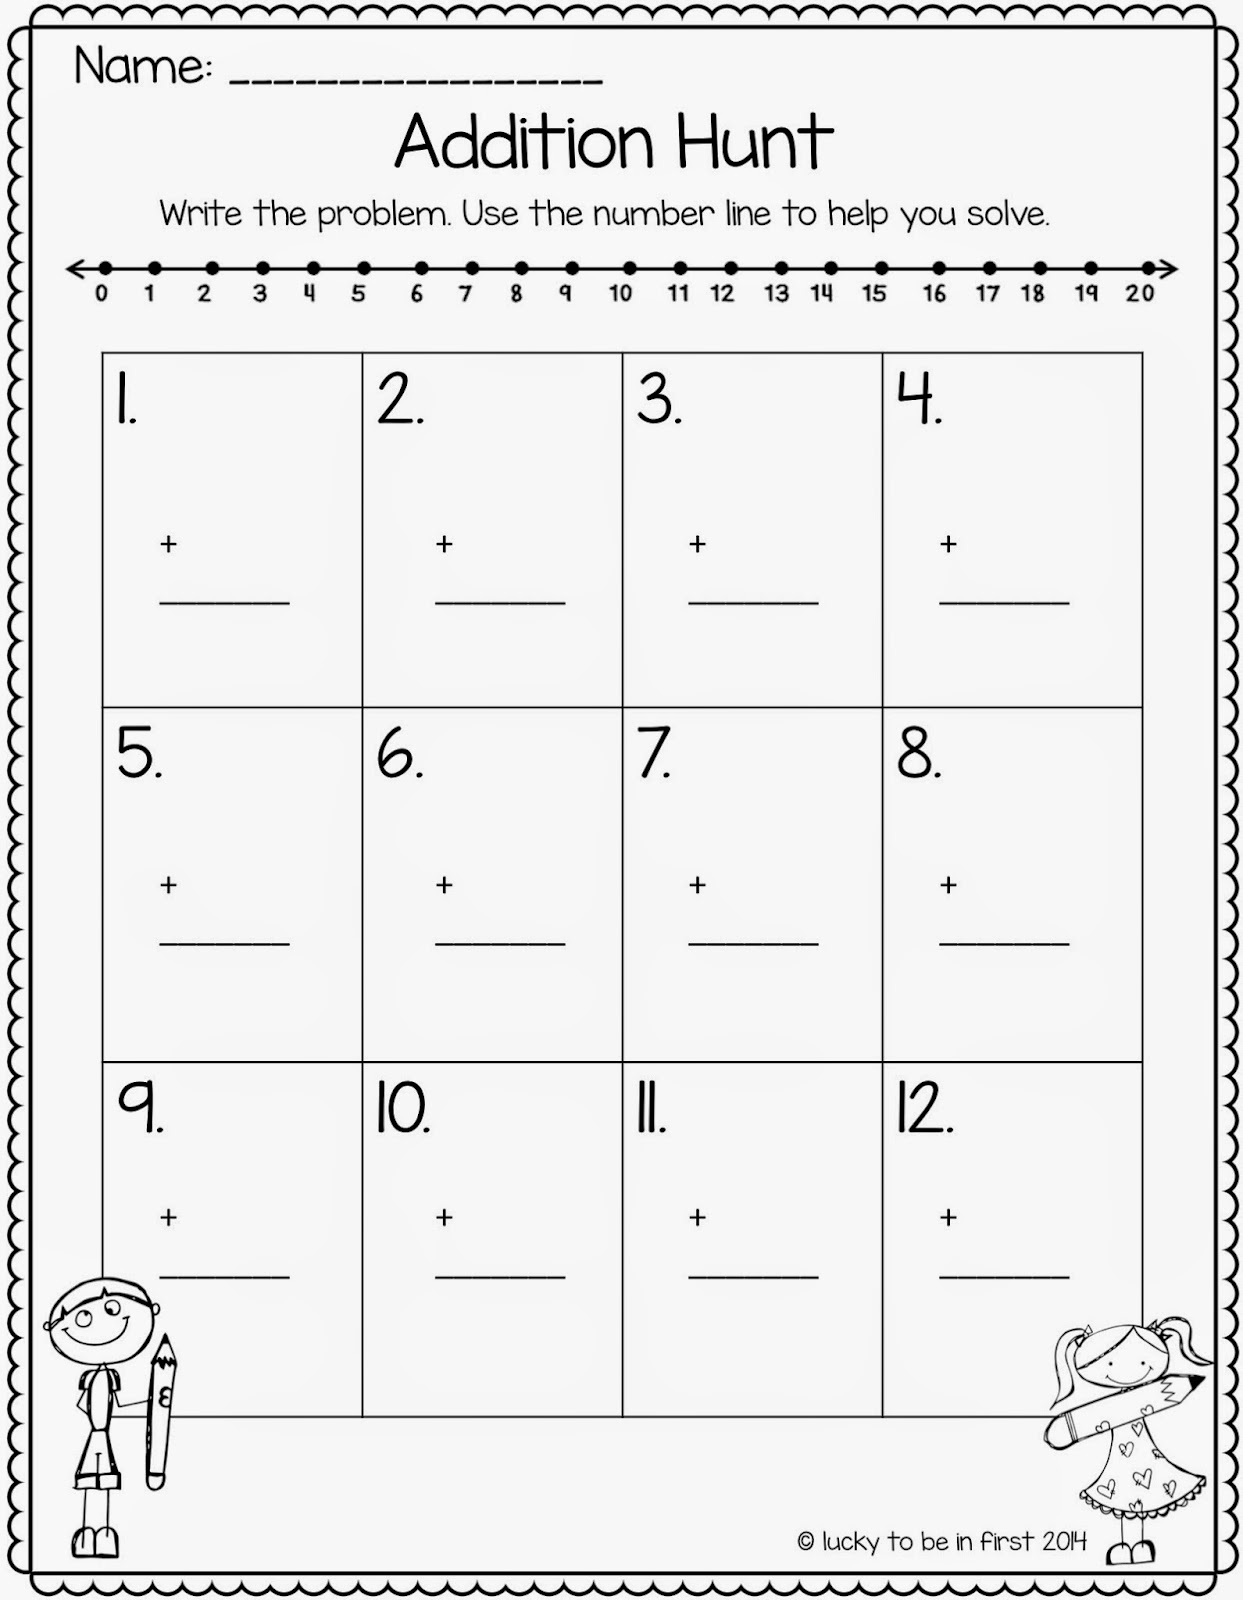 subtraction hunt game for elementary students | Lucky Learning with Molly Lynch 